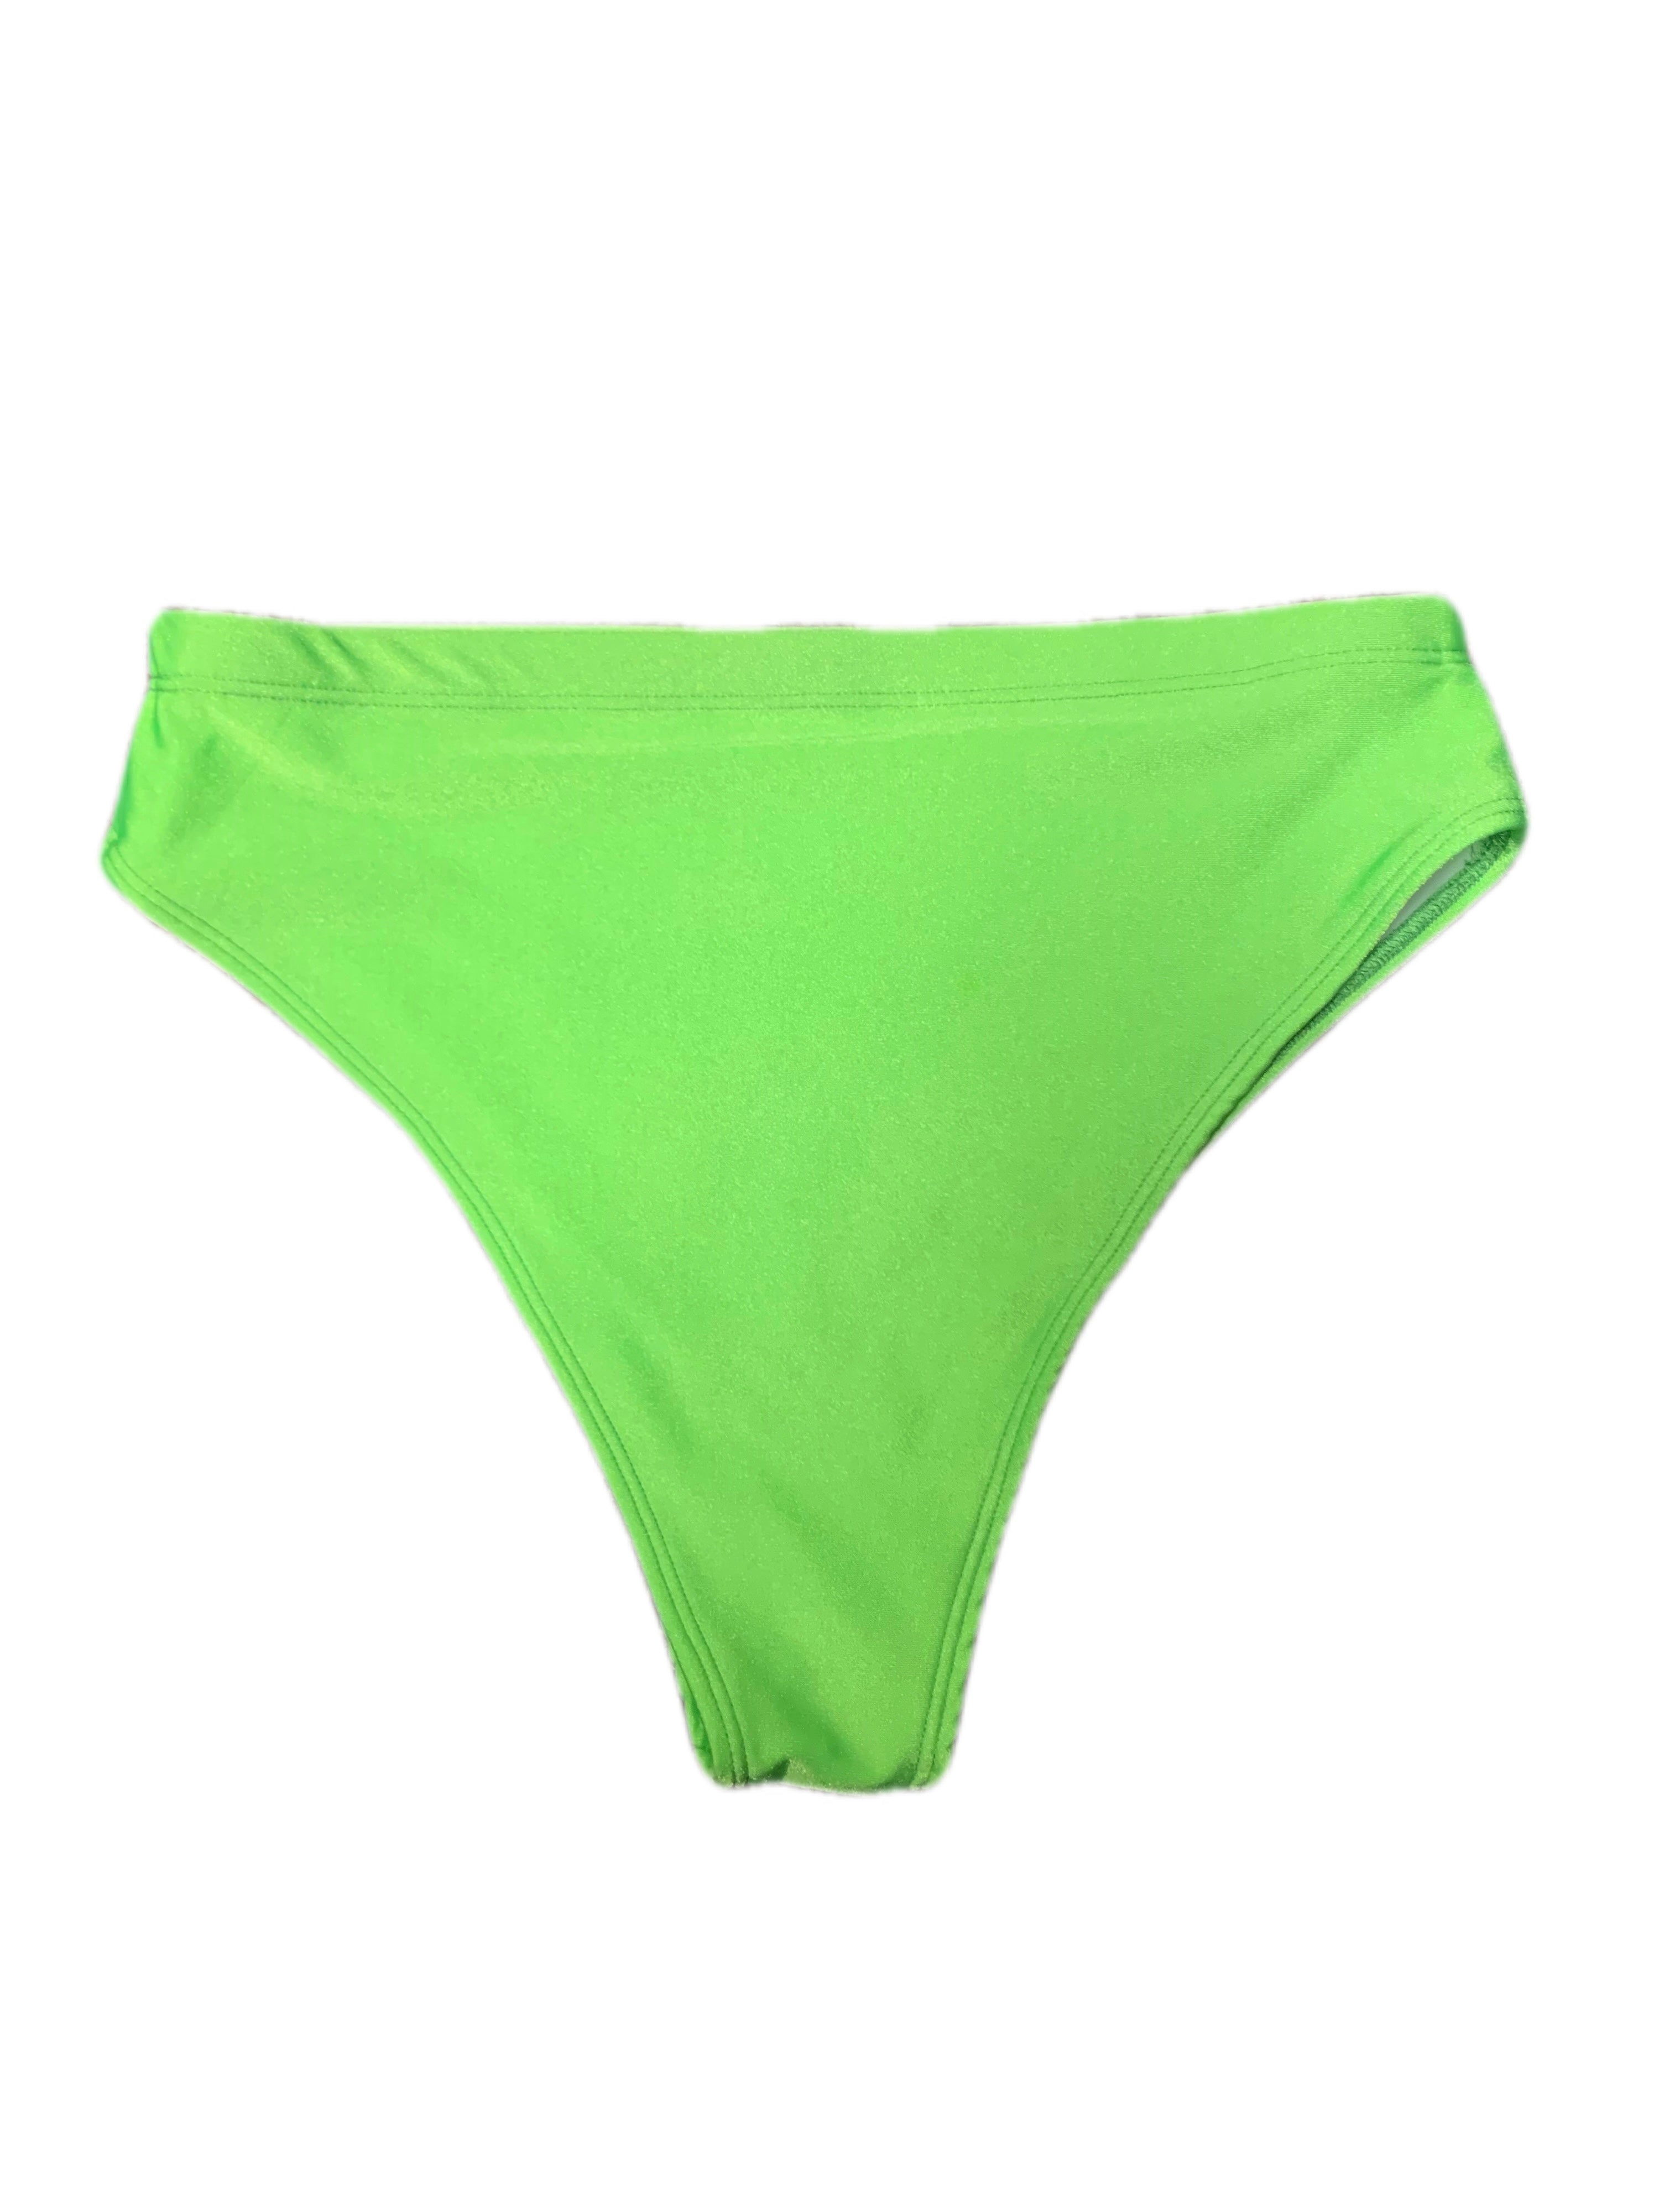 One size fits all, full length, summer weight neon green lyc (730307)